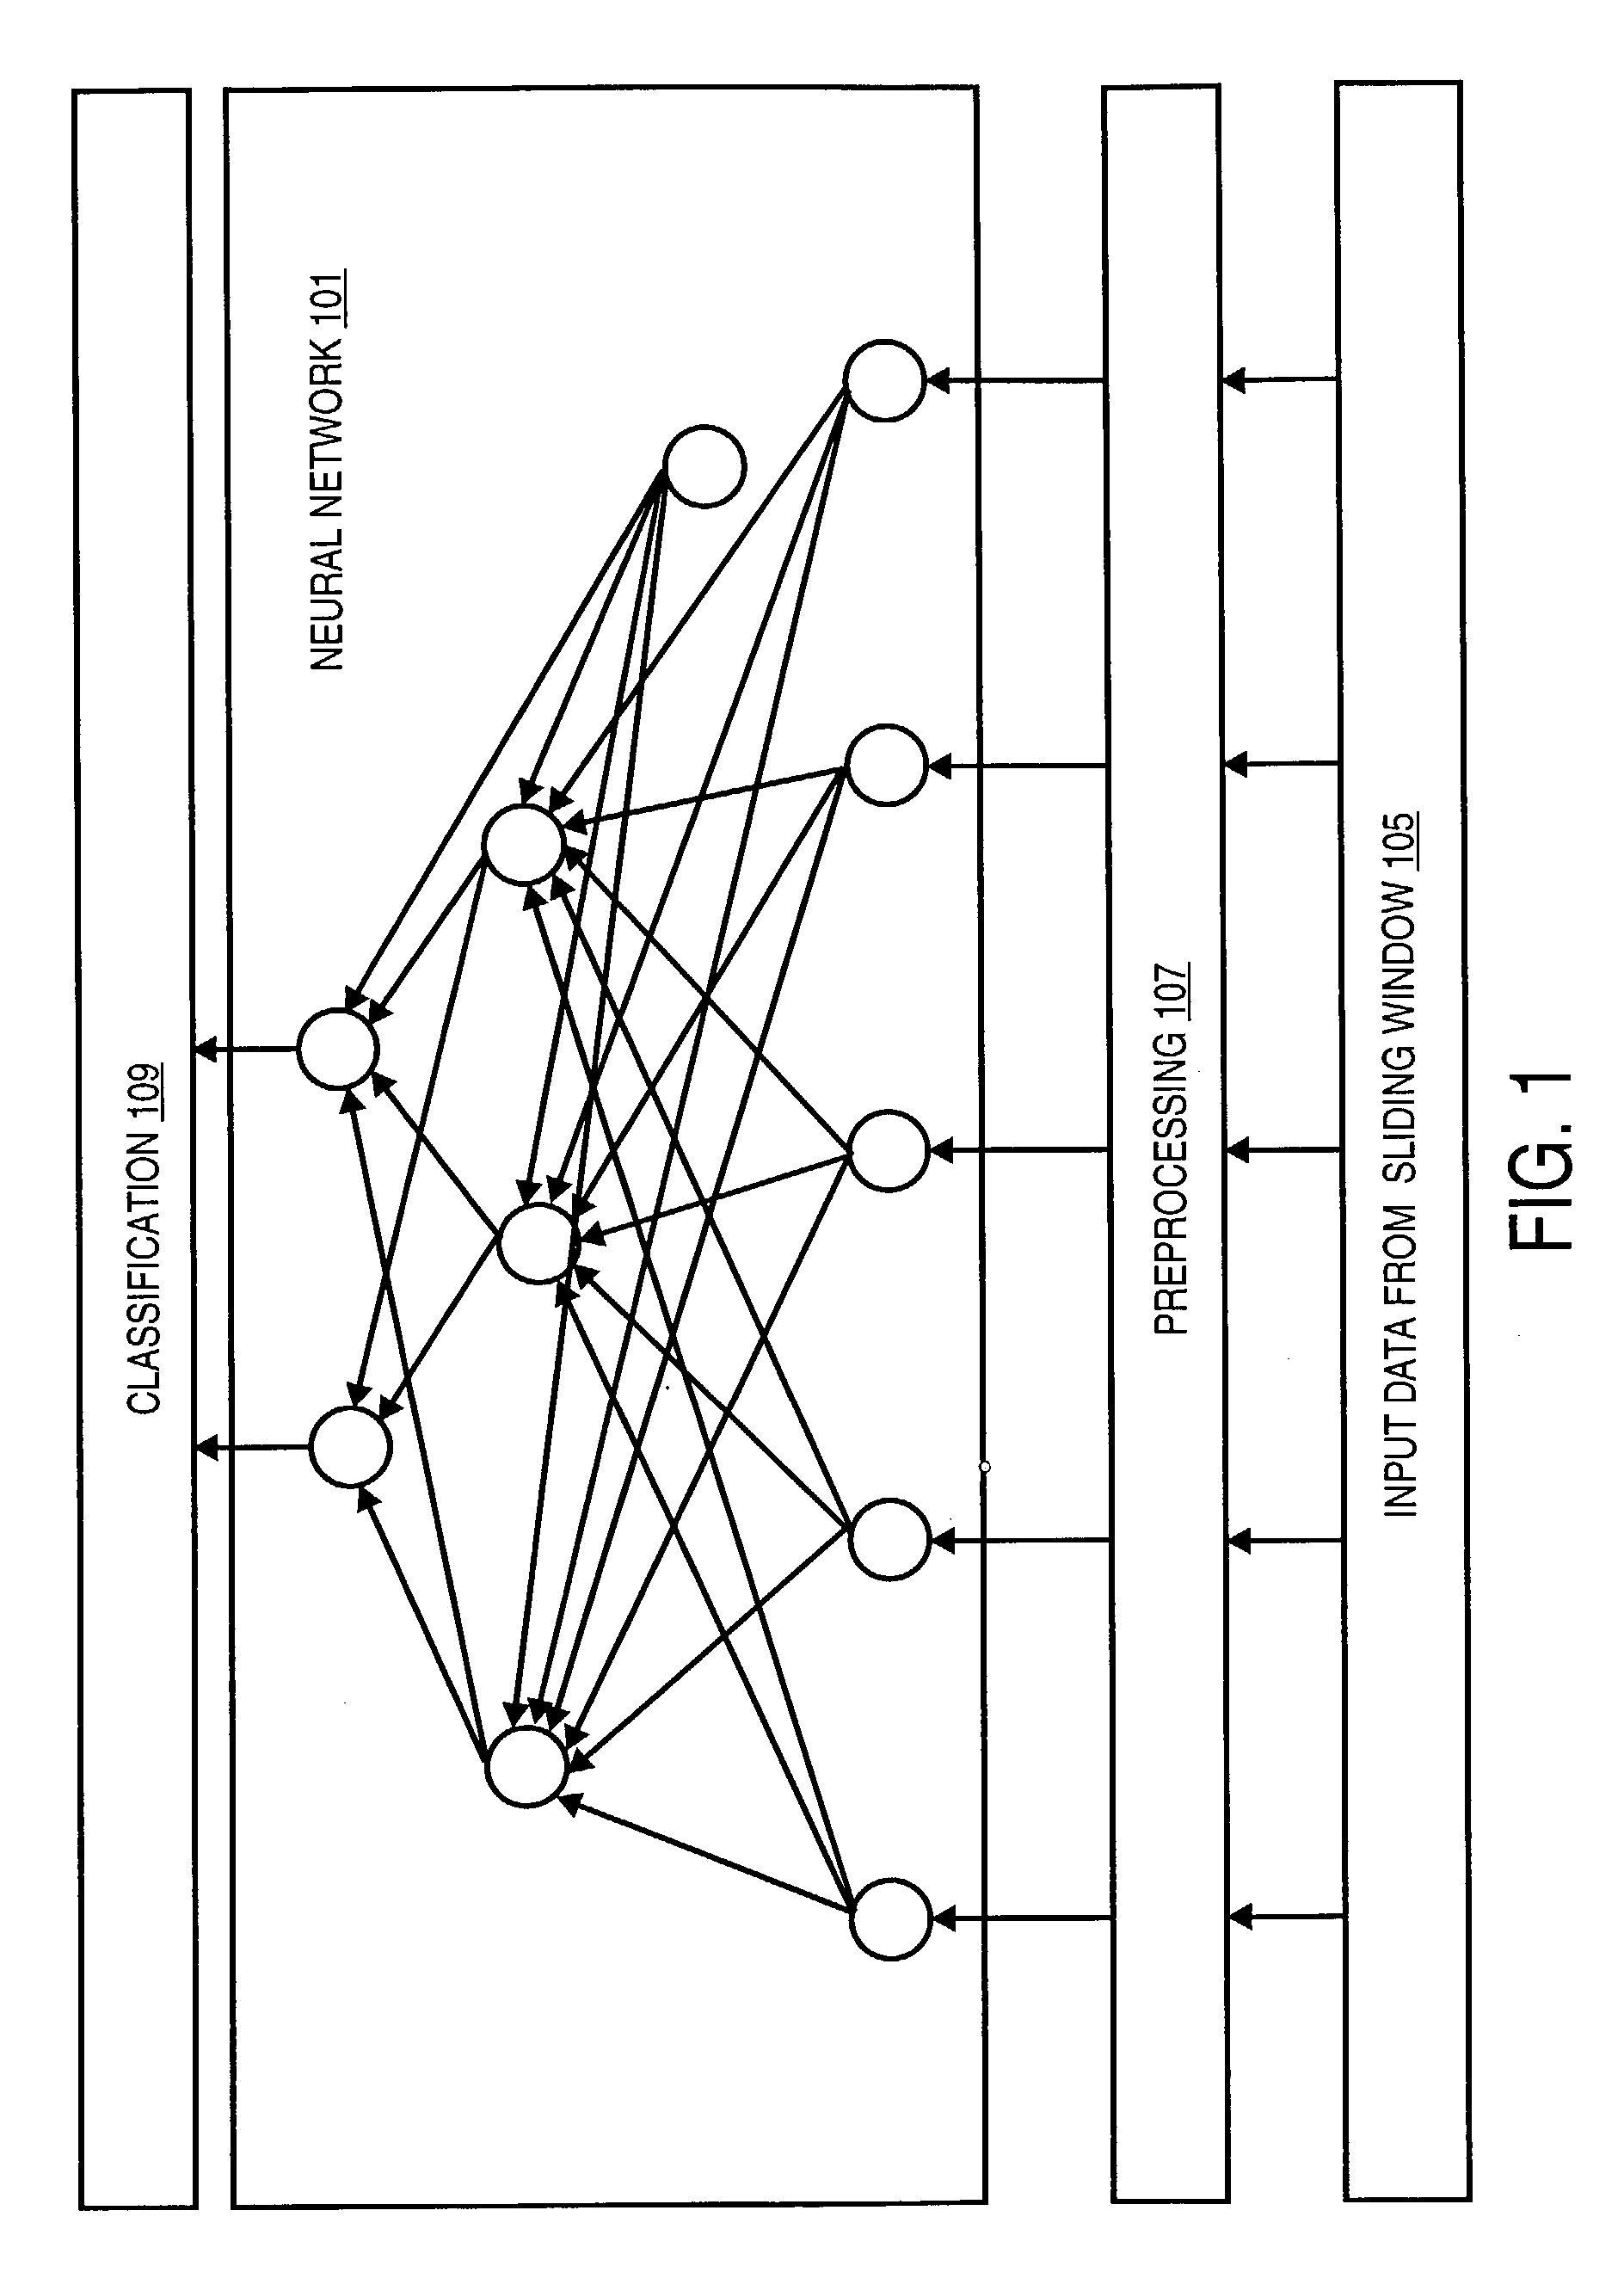 System and method for enhanced hydrocarbon recovery